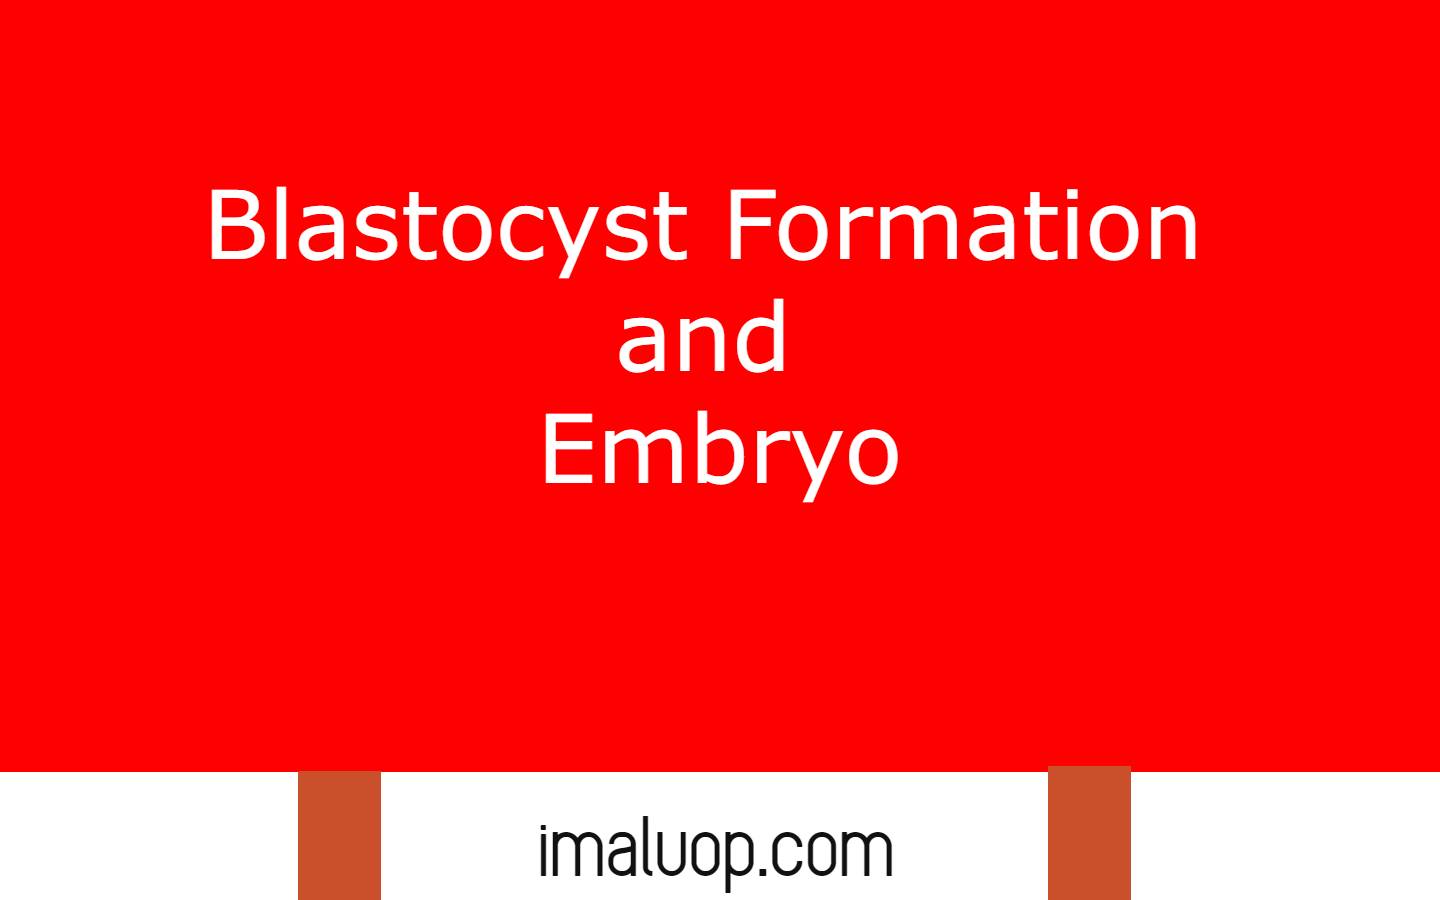 Blastocyst Formation and Embryo